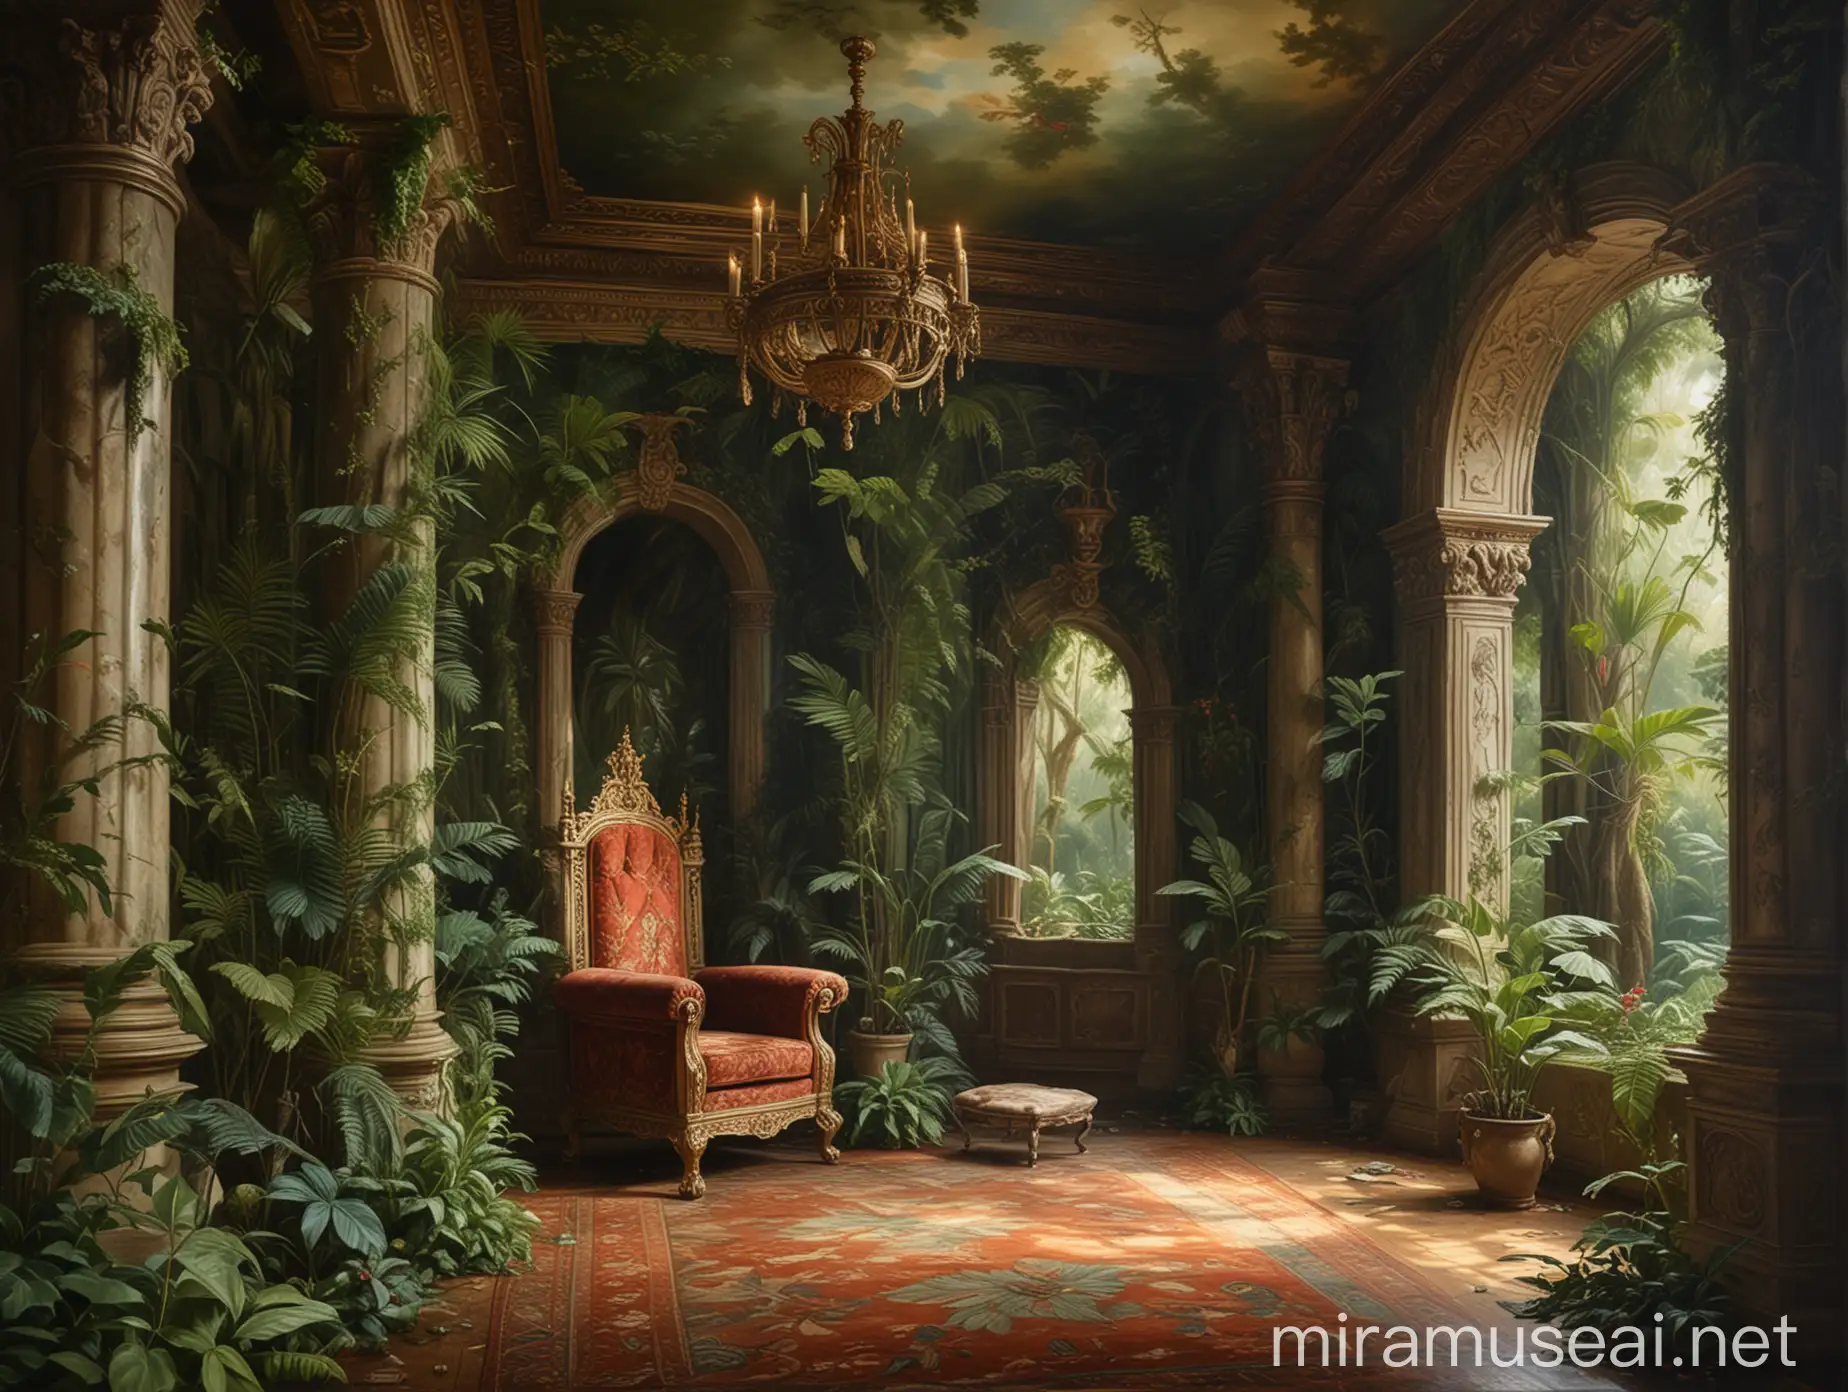 Renaissancestyle Oil Painting of Majestic Jungle Room with Regal Throne